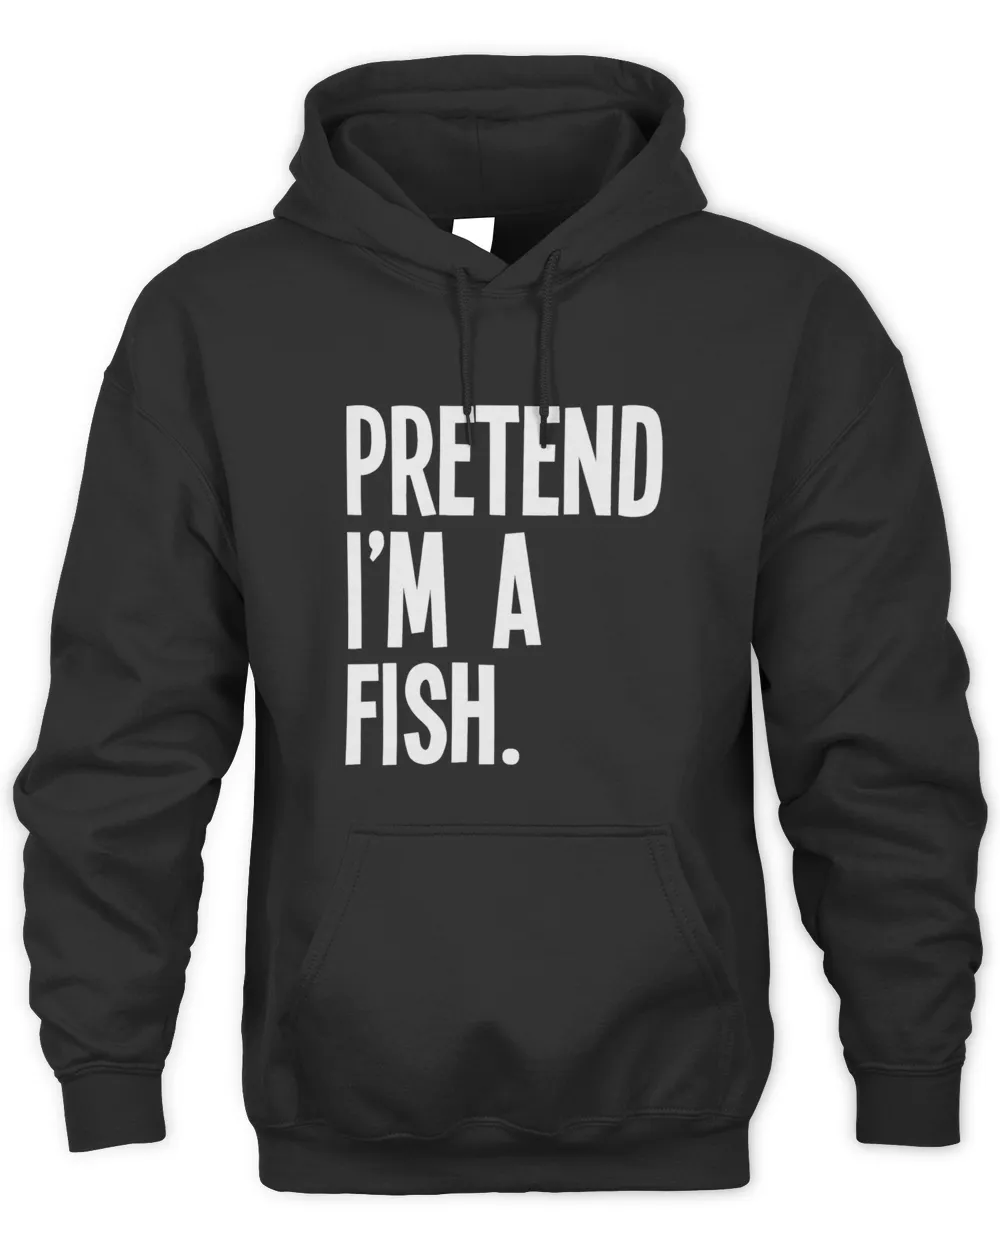 Pretend Im A Fish Funny Halloween Party Costume